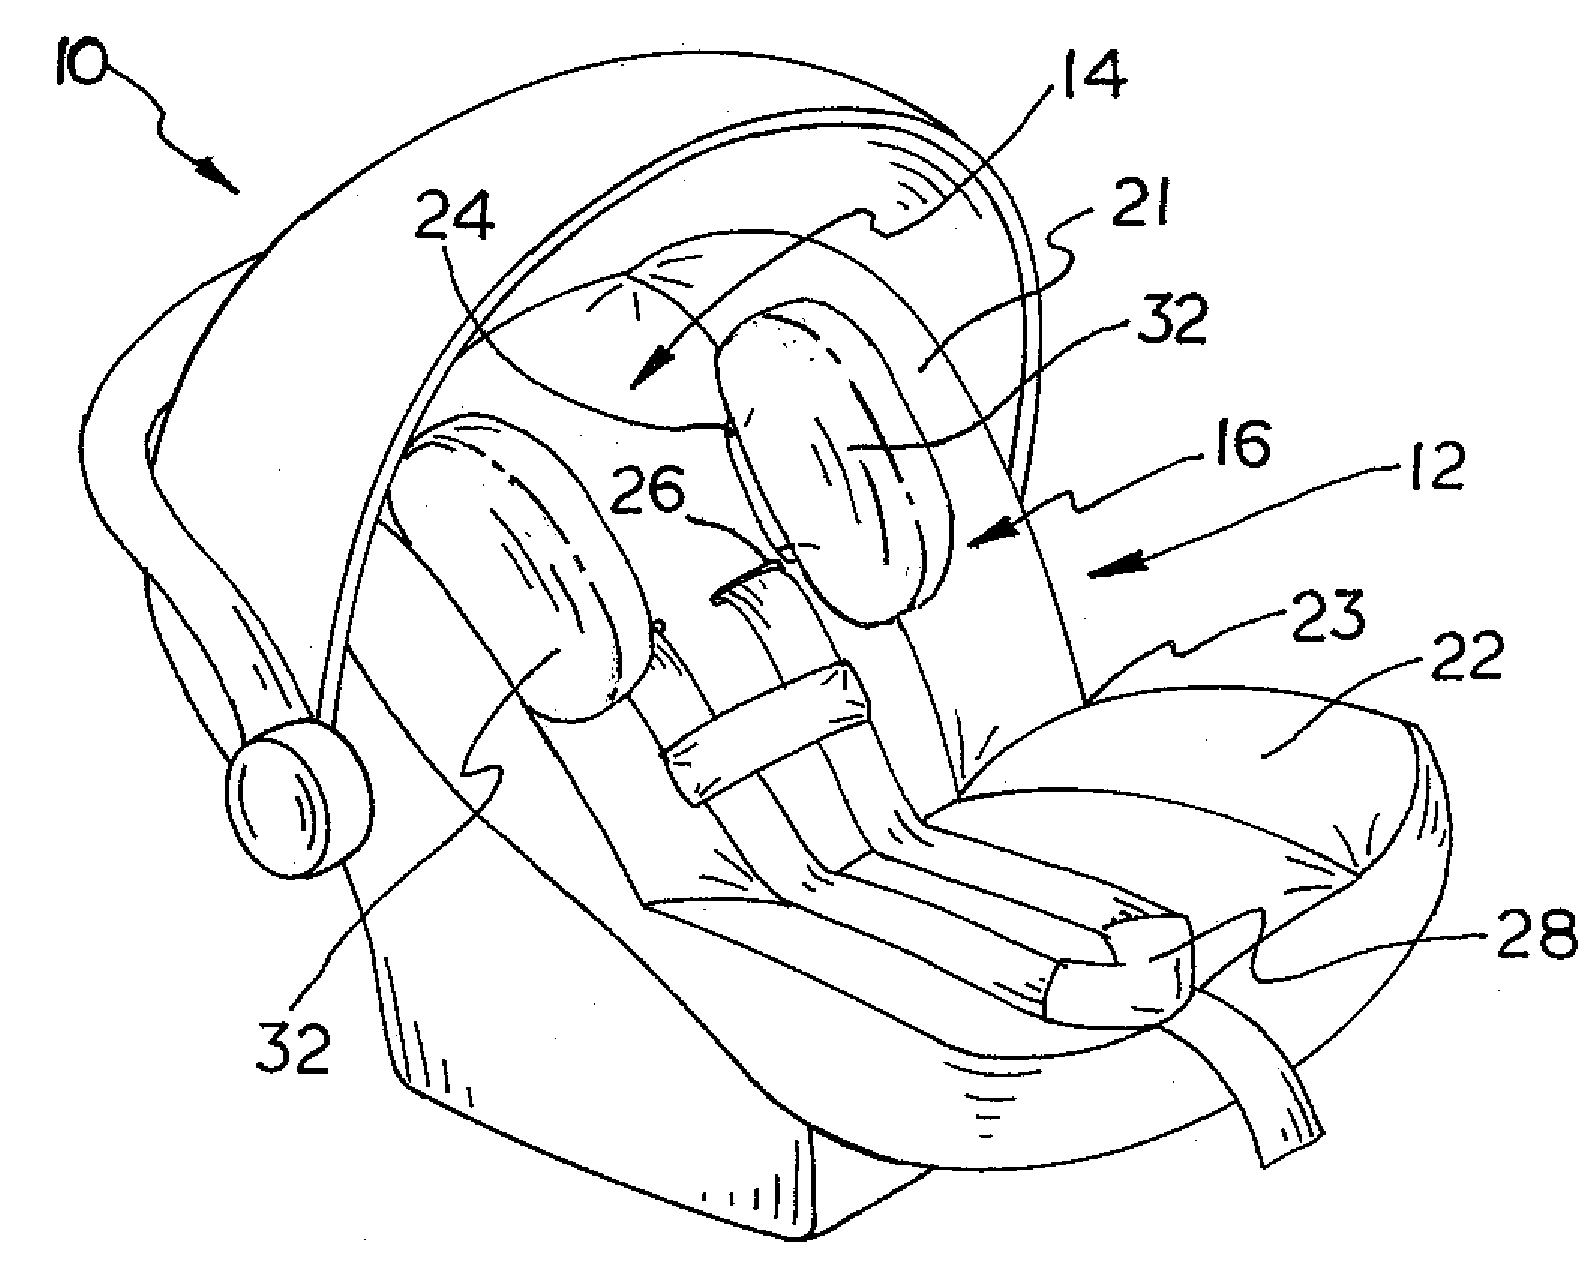 Head Support and Seat Pad Assembly for a Child Seat